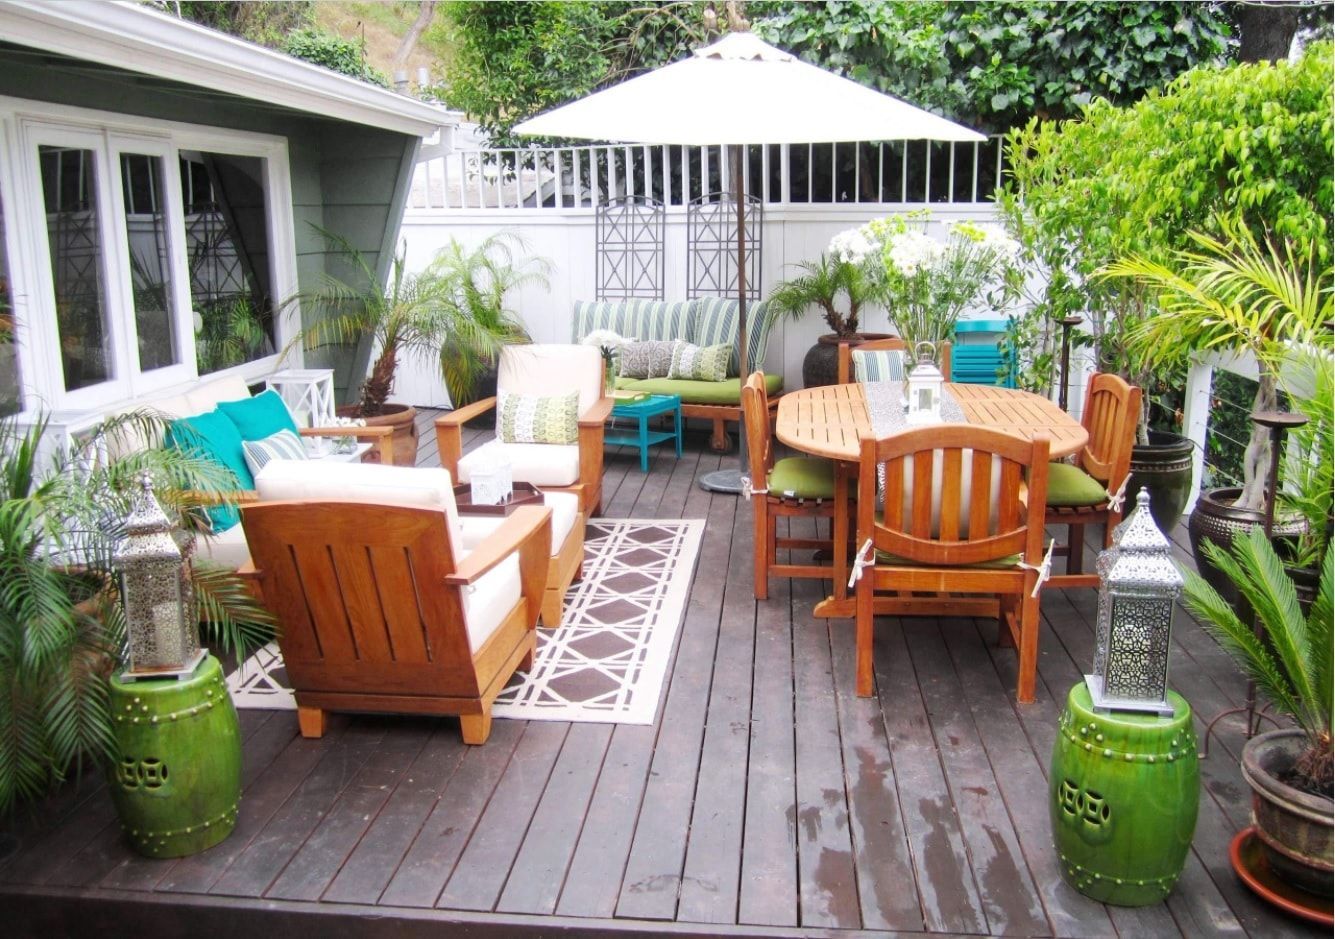 Patio zone with cozy wooden armchairs that transform into sunbeds